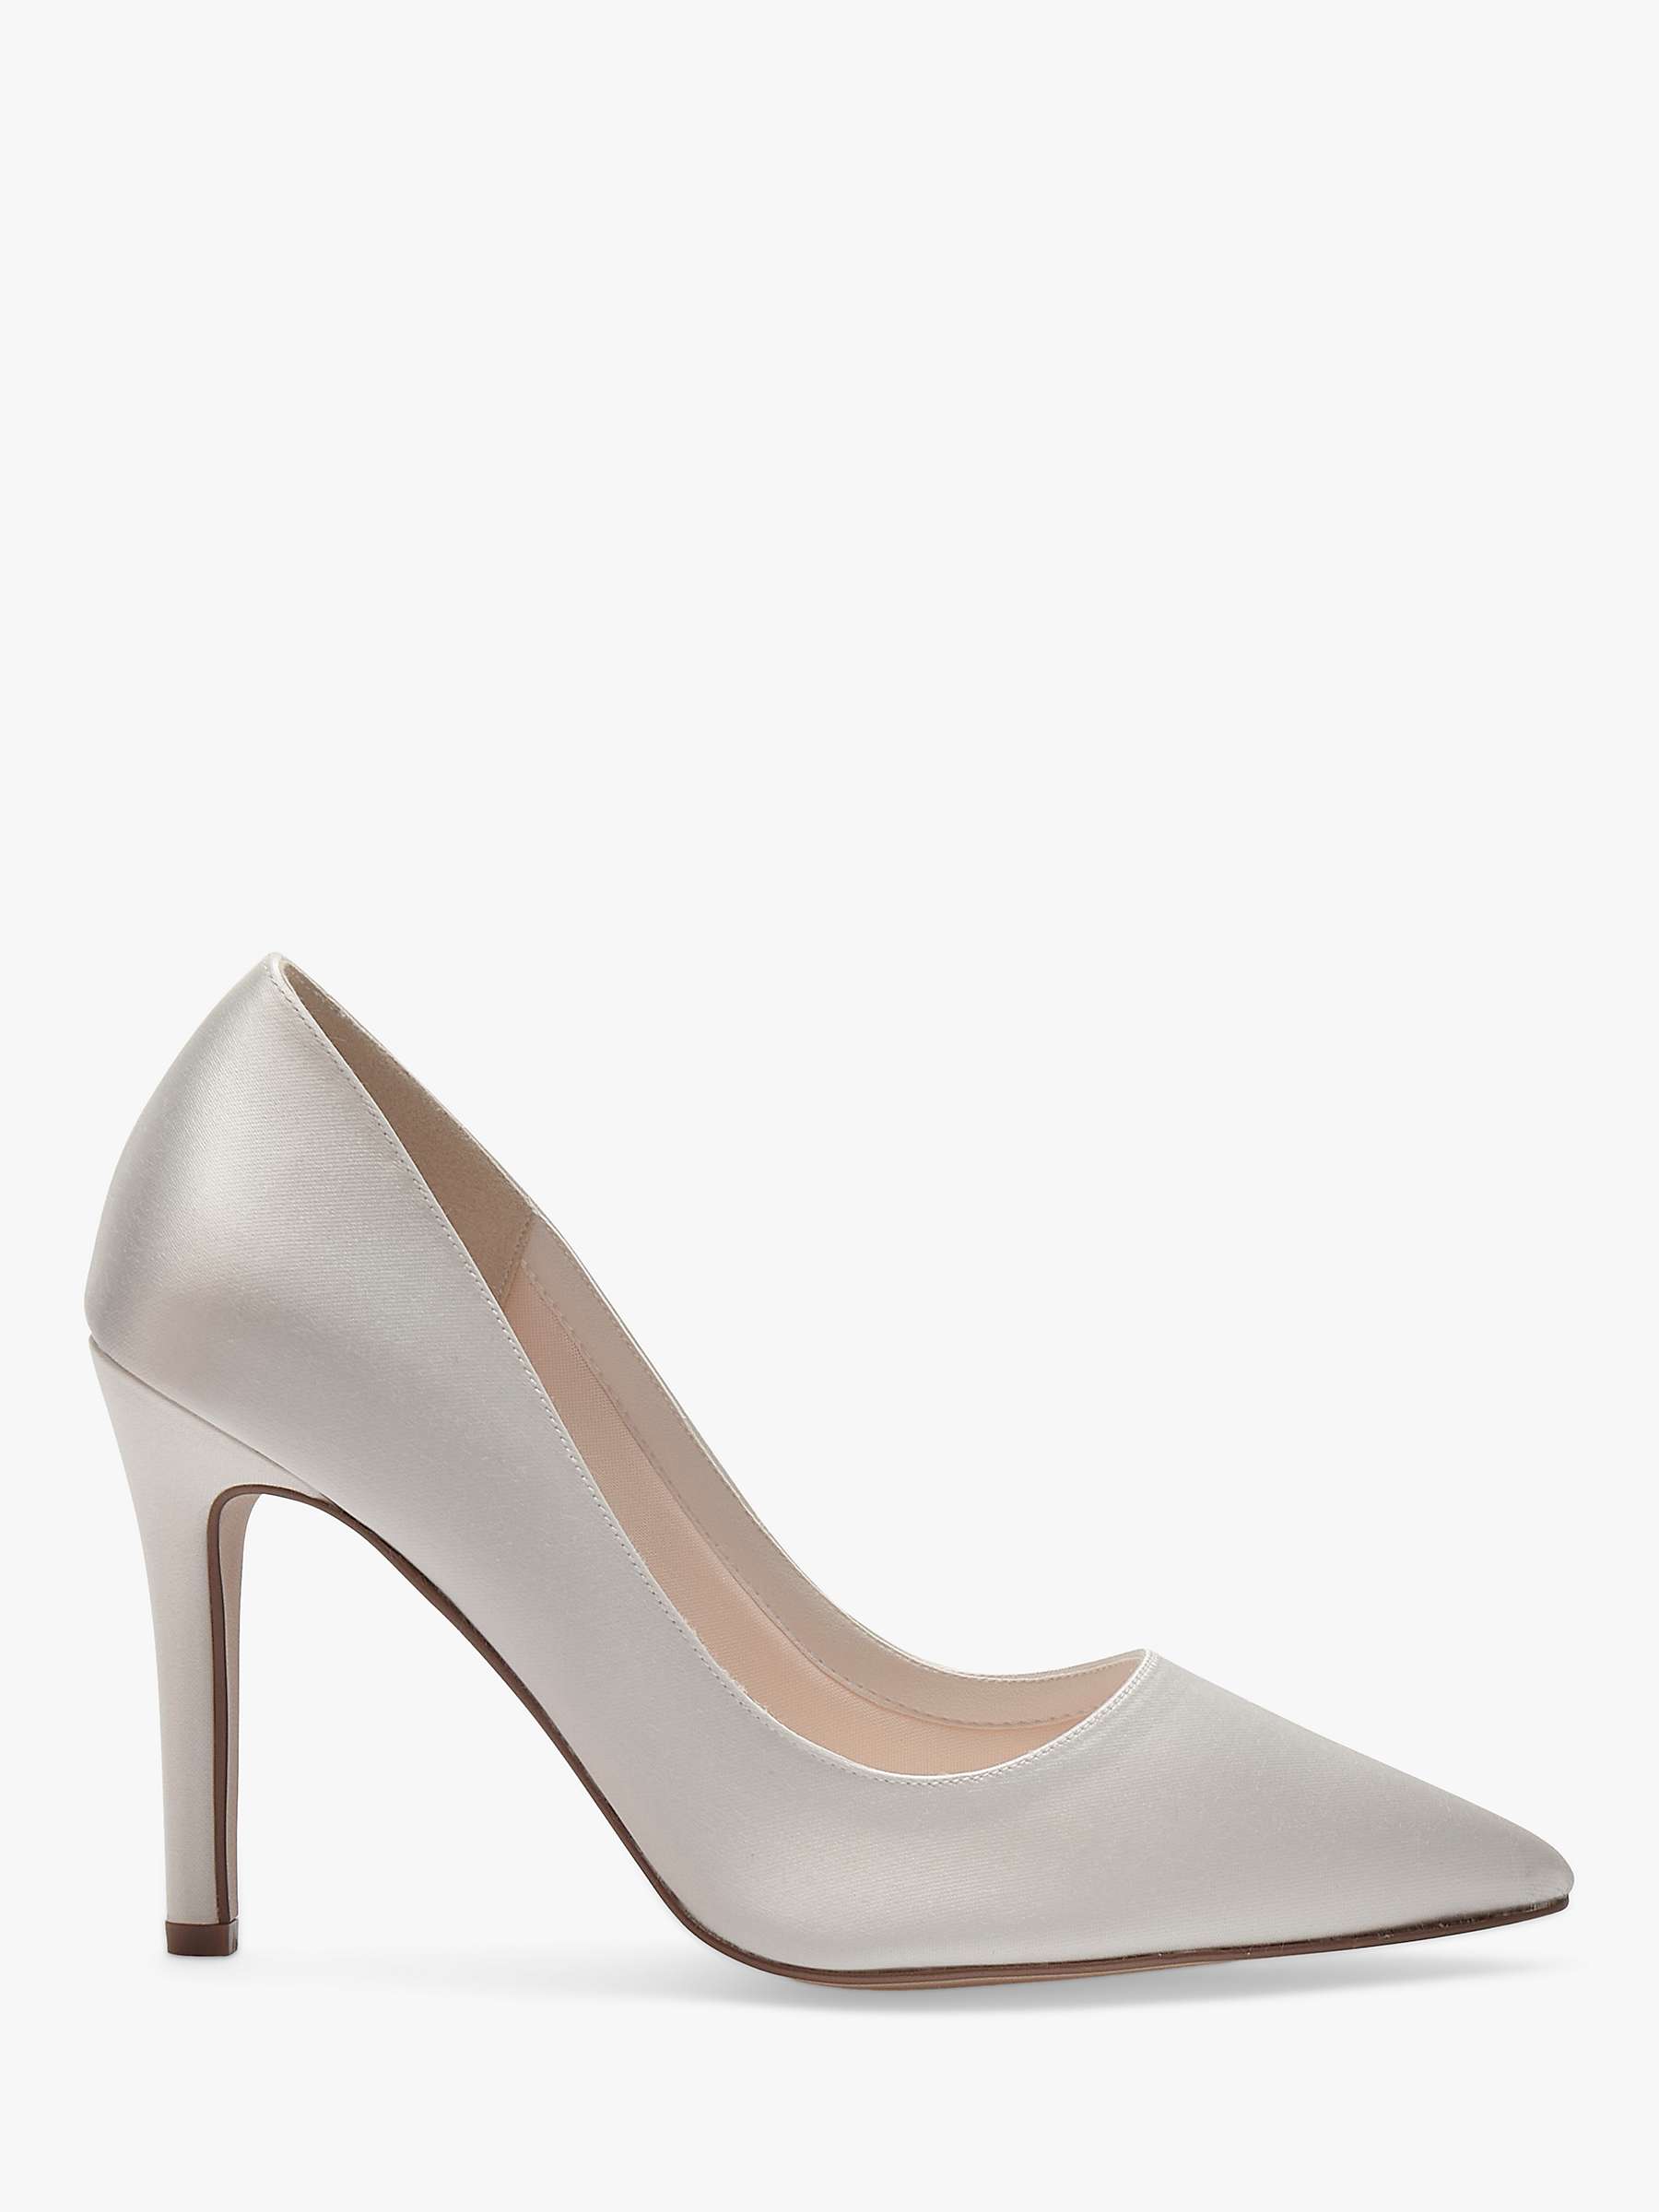 Buy Rainbow Club Coco Pointed Court Shoes, Ivory Satin Online at johnlewis.com